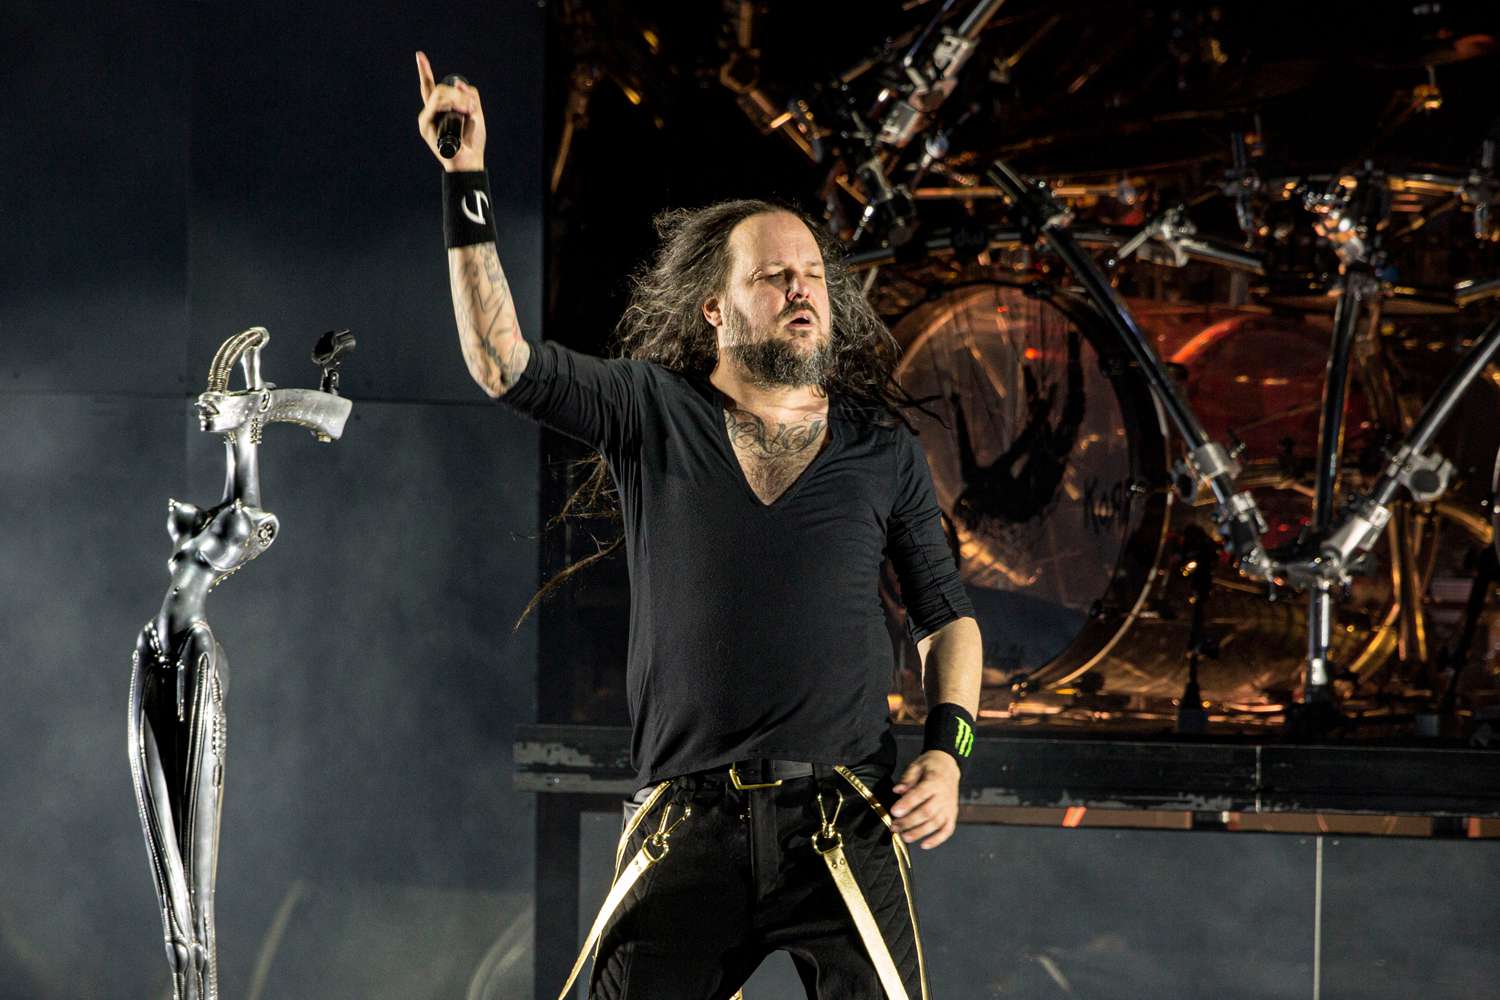 Musician Jonathan Davis of Korn performs on stage at North Island Union Amphitheatre on September 02, 2019 in Chula Vista, California.